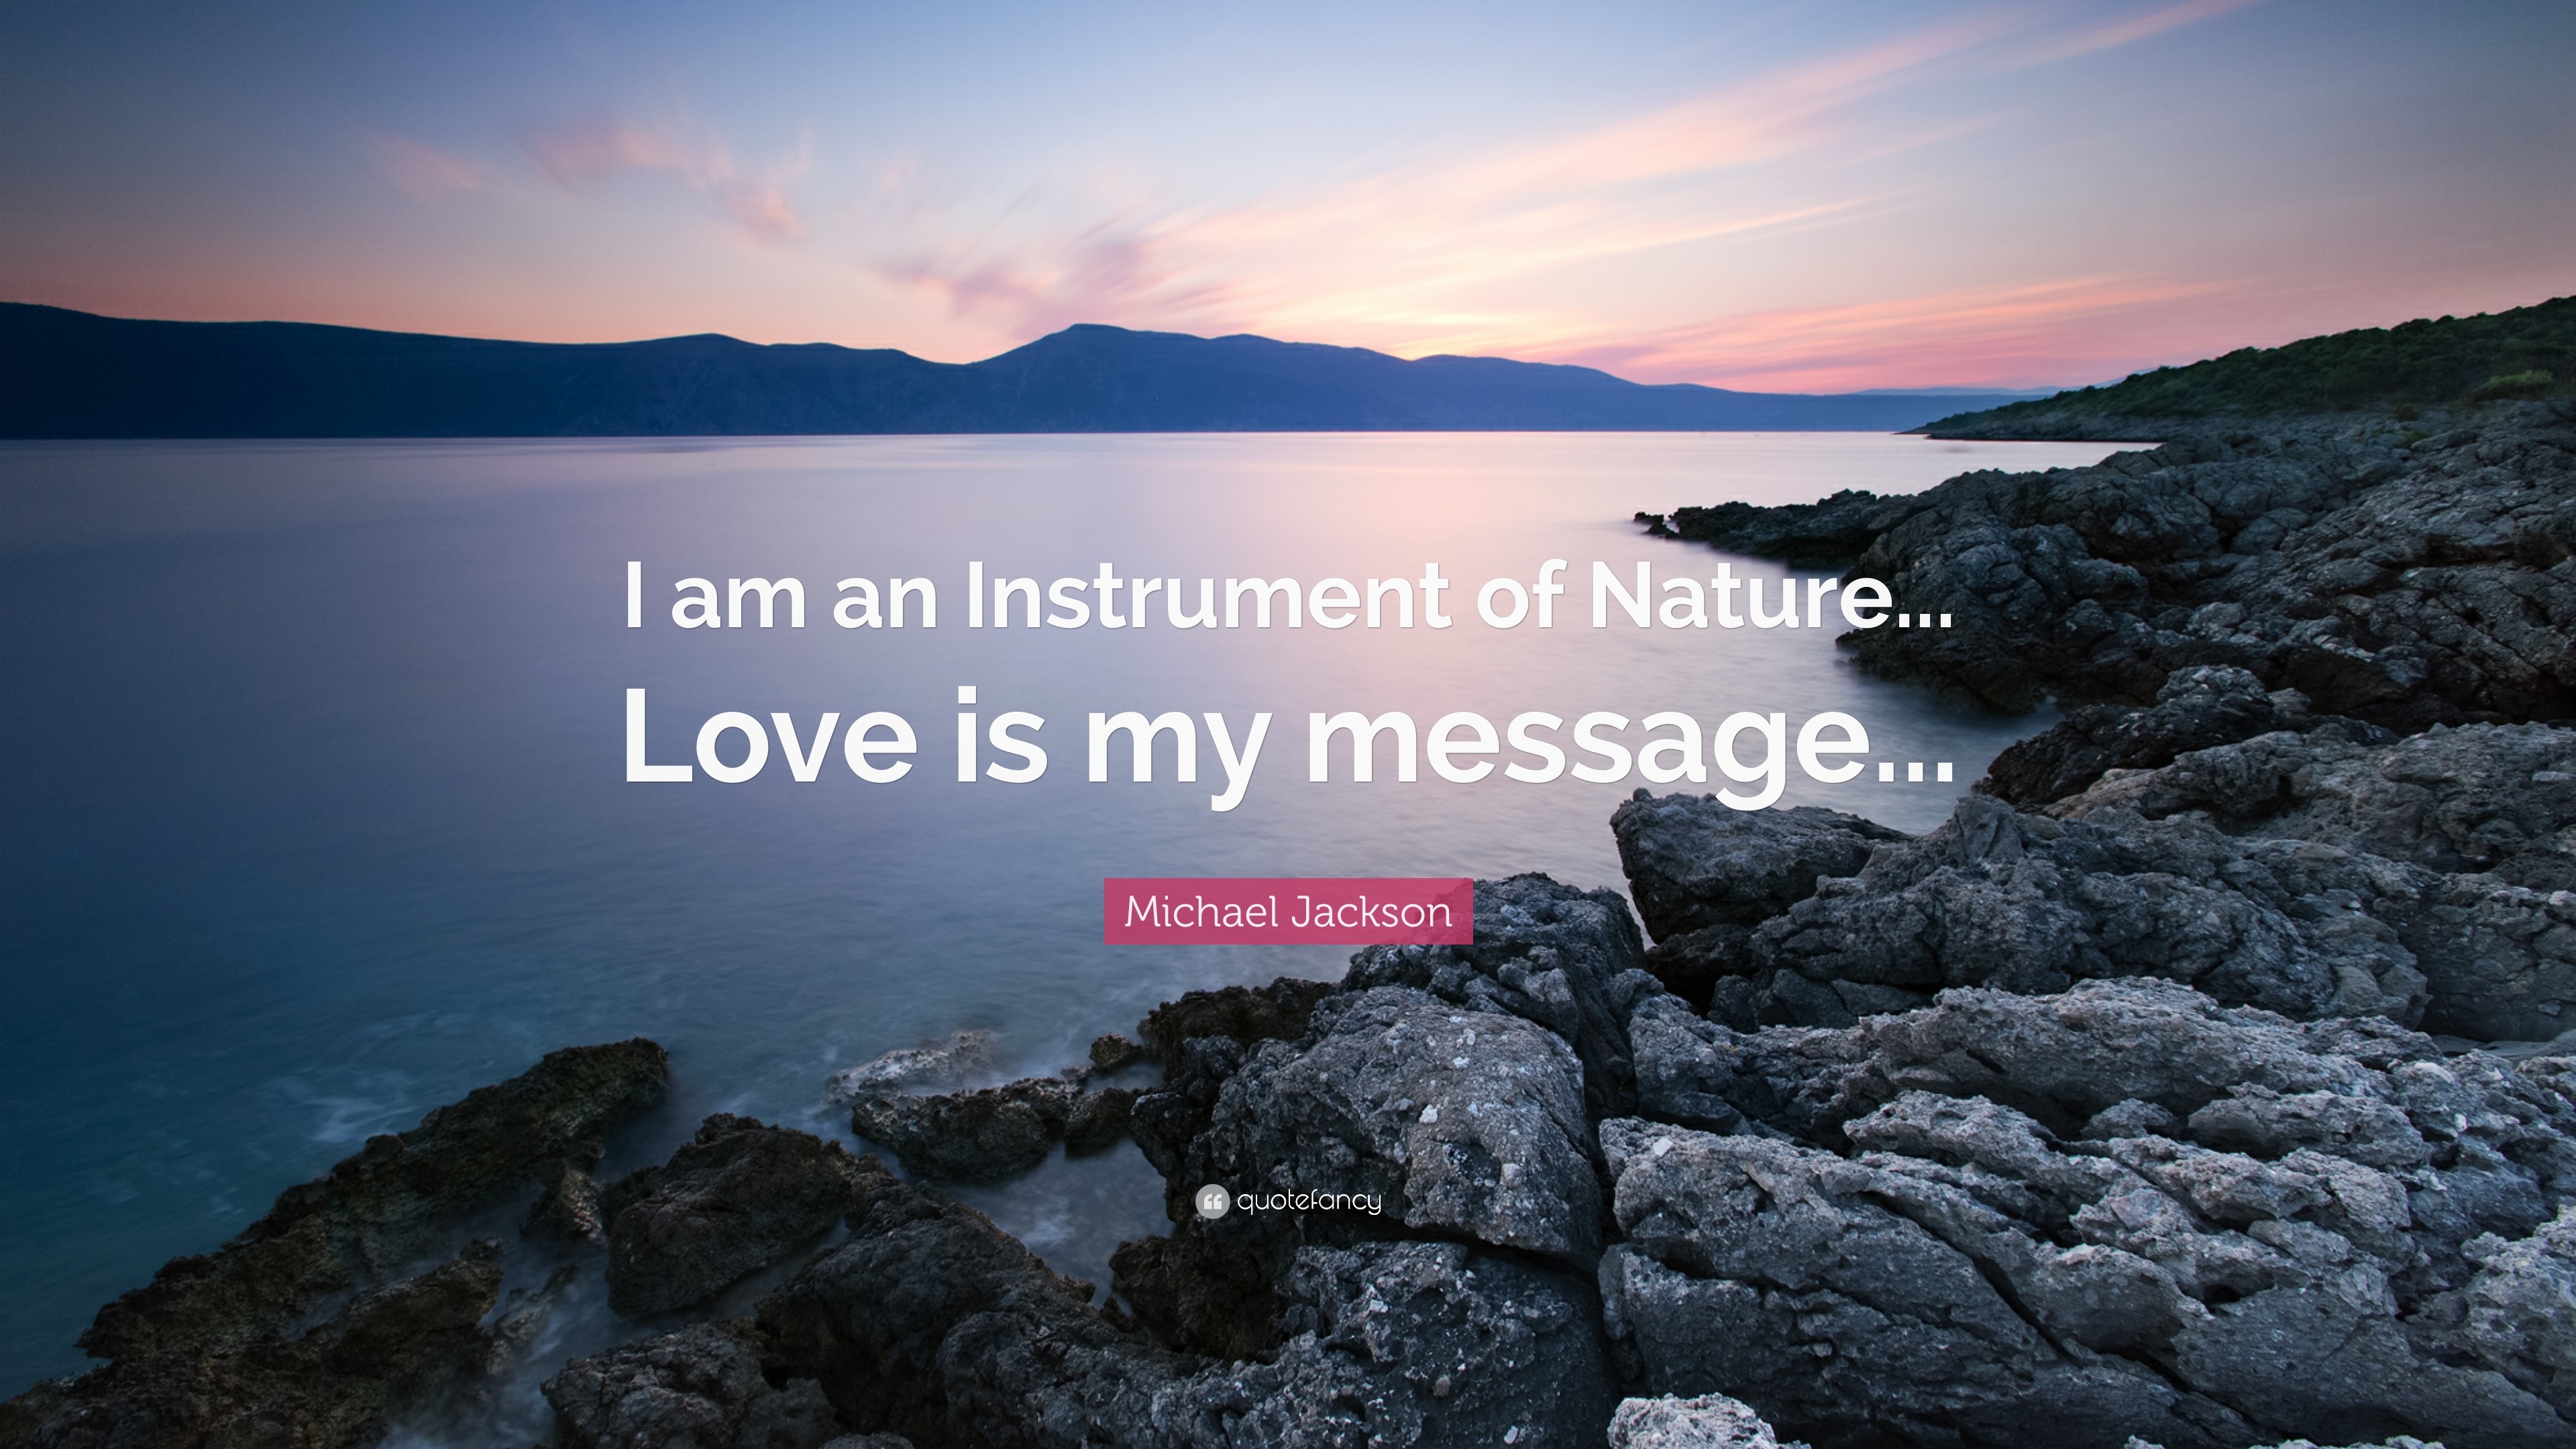 3840x2160 Michael Jackson Quote: “I am an Instrument of Nature. Love is my message